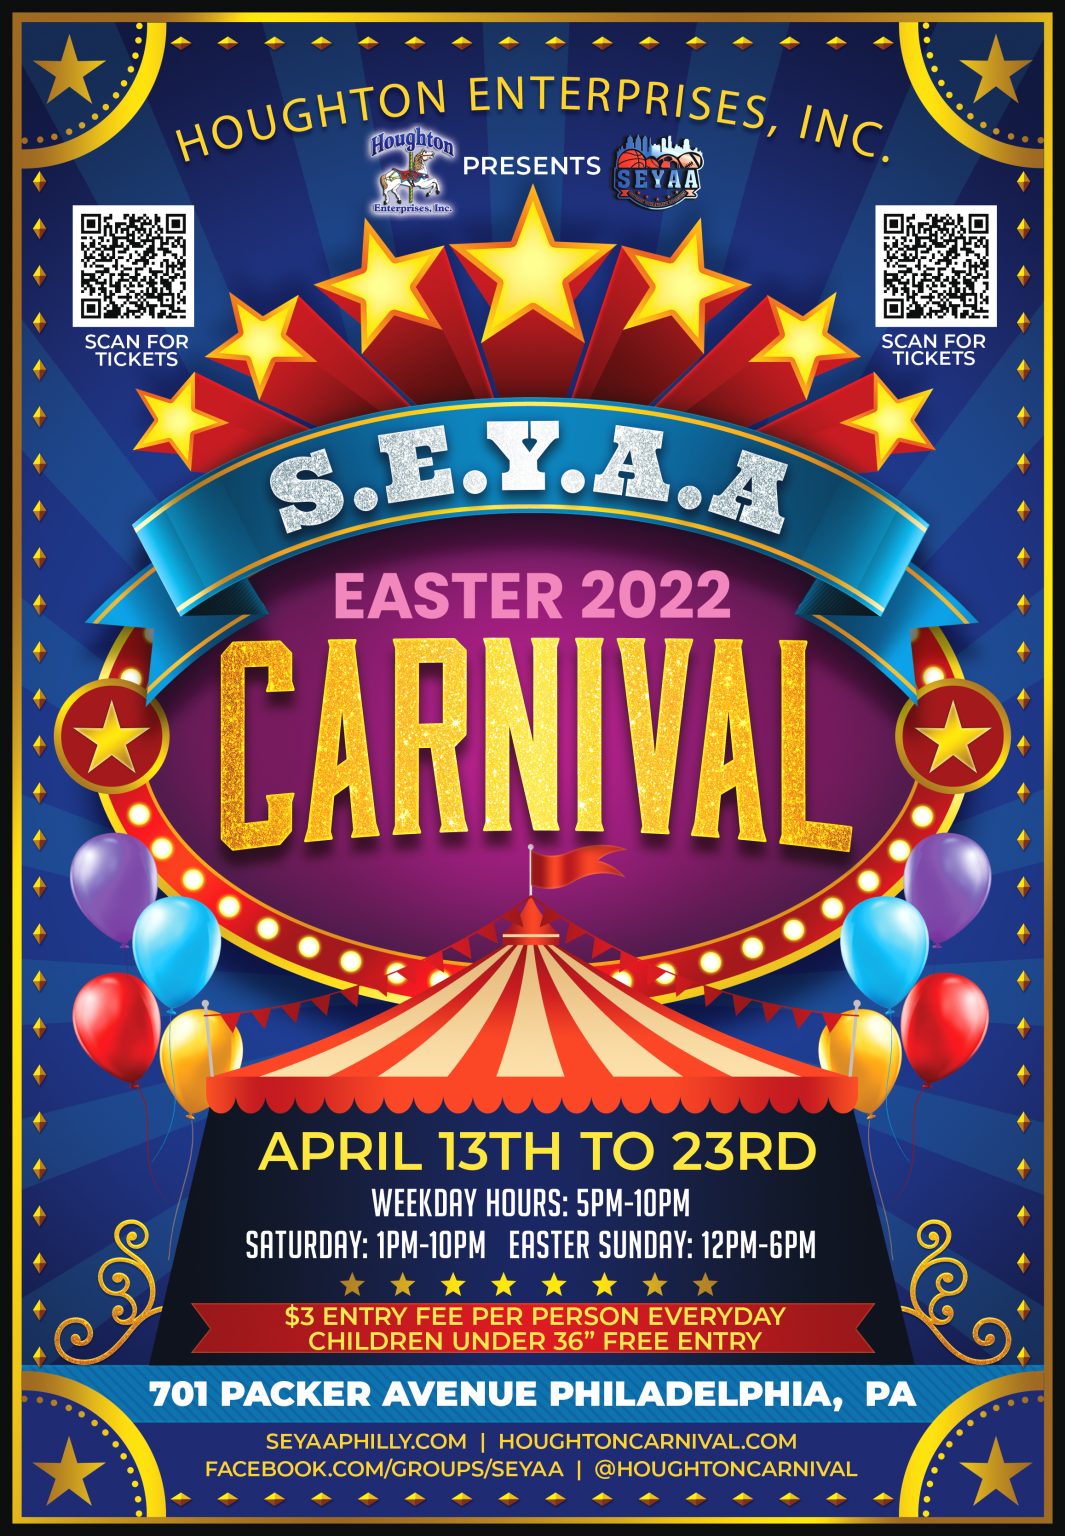 S.E.Y.A.A. Easter Carnival PreSale Tickets! S.E.Y.A.A.